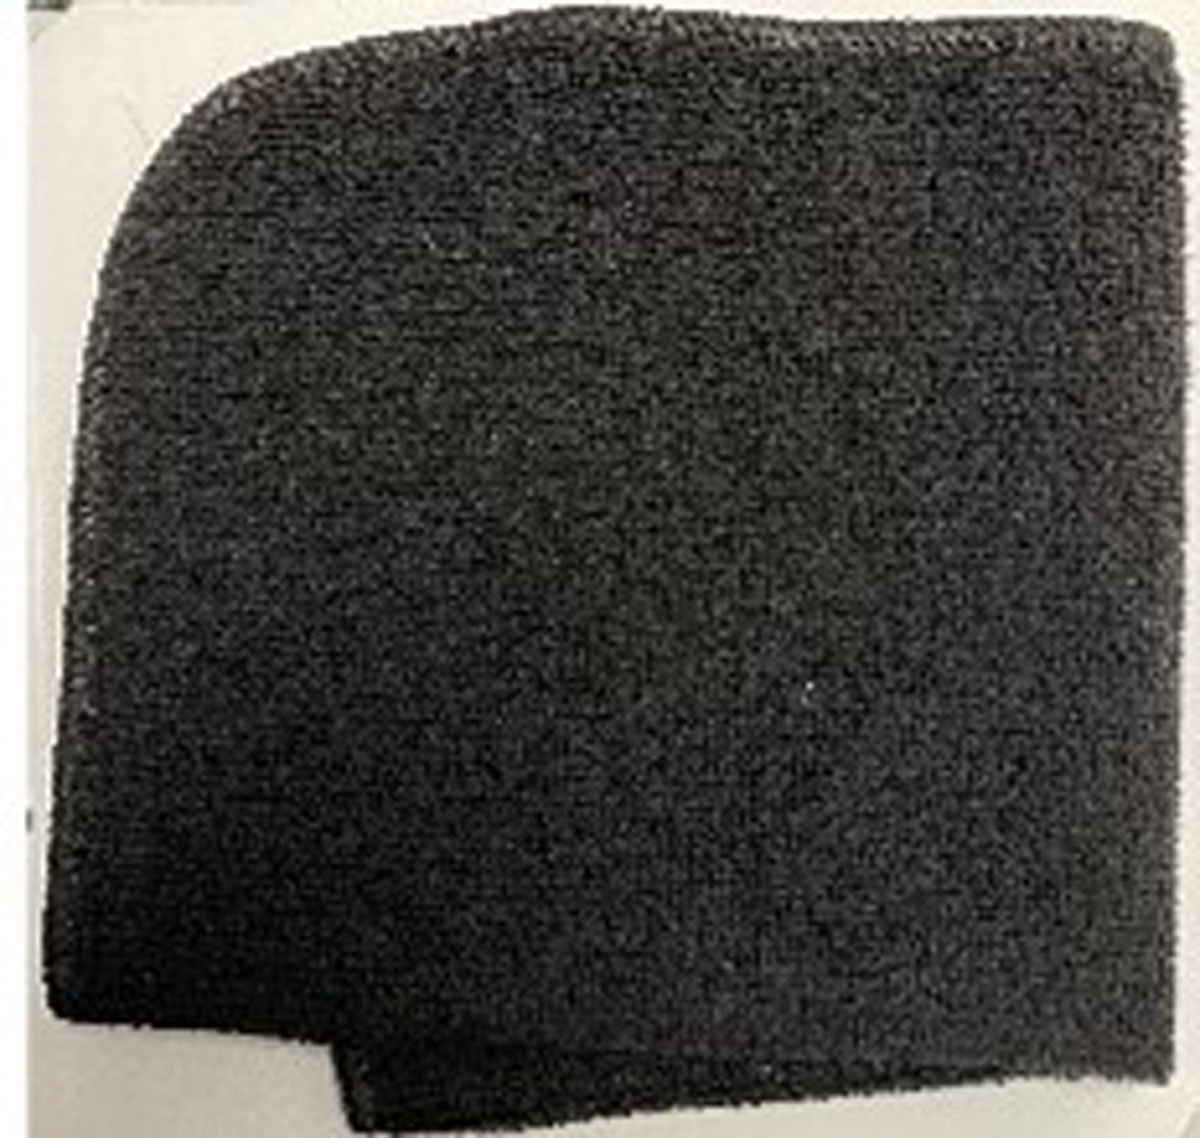 Can I reuse these black microfiber cloths multiple times?